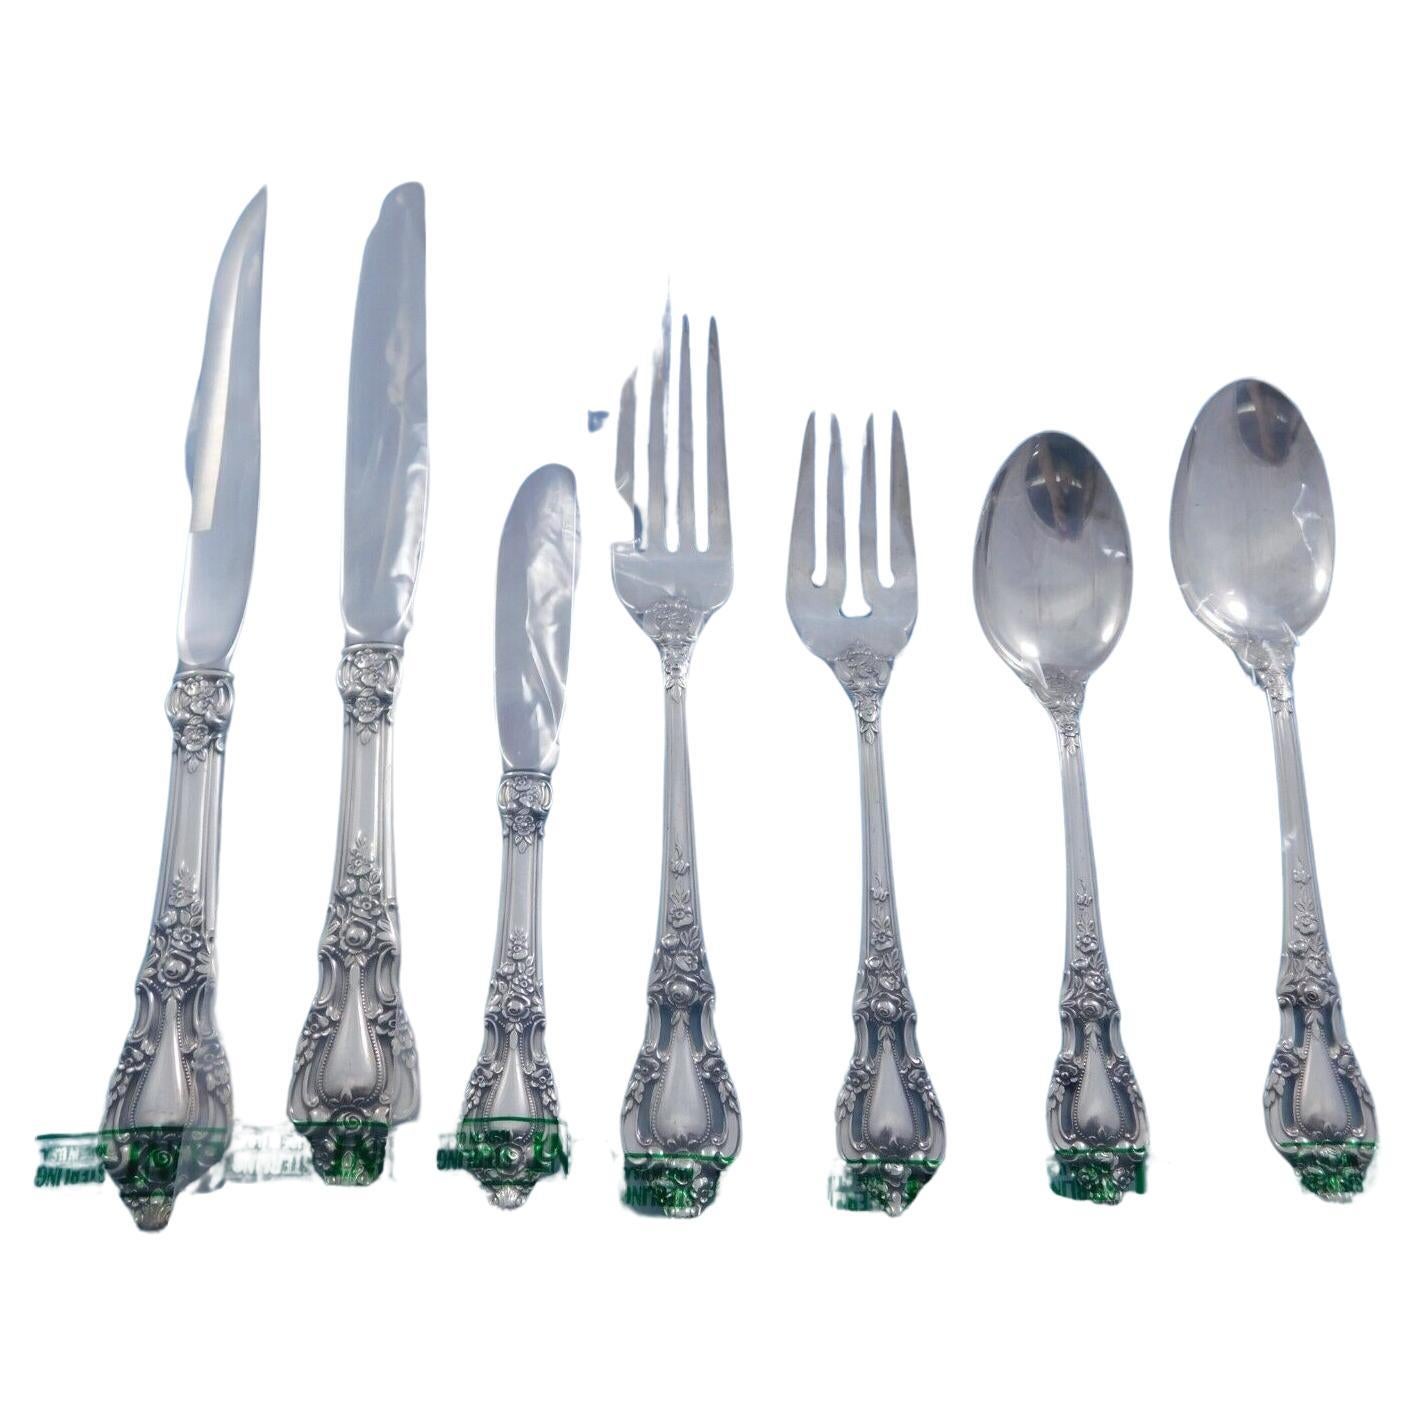 Eloquence by Lunt Sterling Silver Flatware Set for 8 Service 58 pieces New